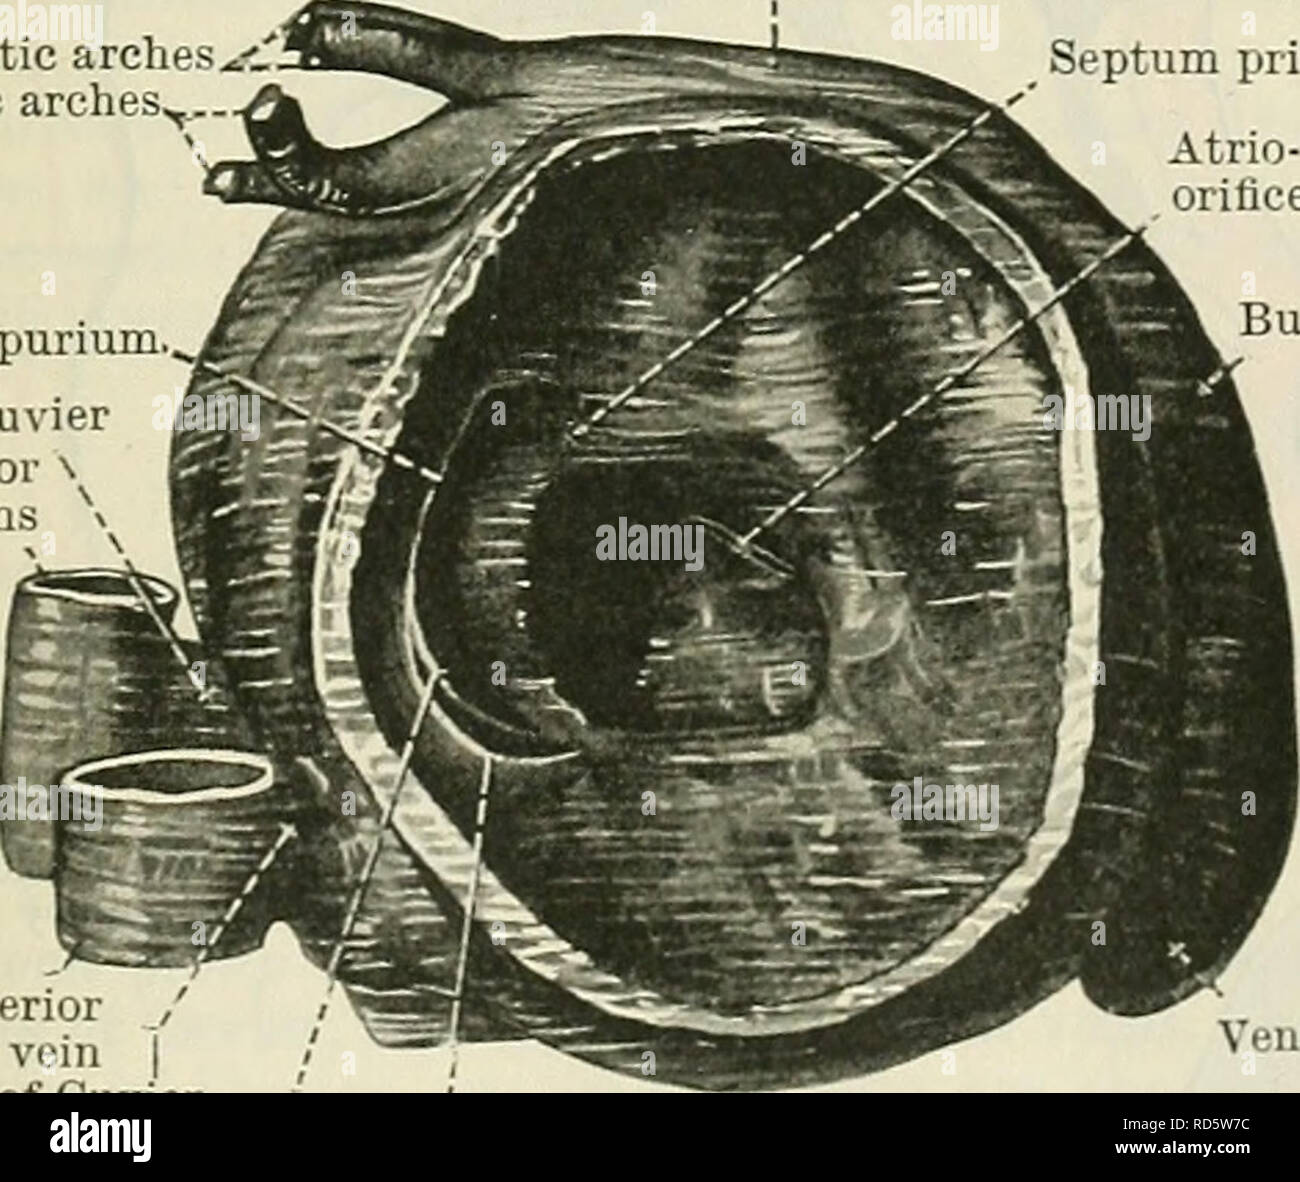 . Cunningham's Text-book of anatomy. Anatomy. Fig. 829. Interventricular sulcus -Section of the Heart of a Human Embryo. (Edinburgh University collection.) 6th aortic arches^1. 4th aortic arches, Septum spurium Left duct of Cuvier Left anterior  cardinal veins  Septum primum Atrio-ventricular orifice Bulbus cordis of the truncus arteriosus and the adjacent part of the bulbus cordis; and (2) the primitive atrium is divided into the right and left per- manent atria by the forma- tion of two interatrial septa. By the ventral growth of the right and left margins of the atrium the auricles of the Stock Photo